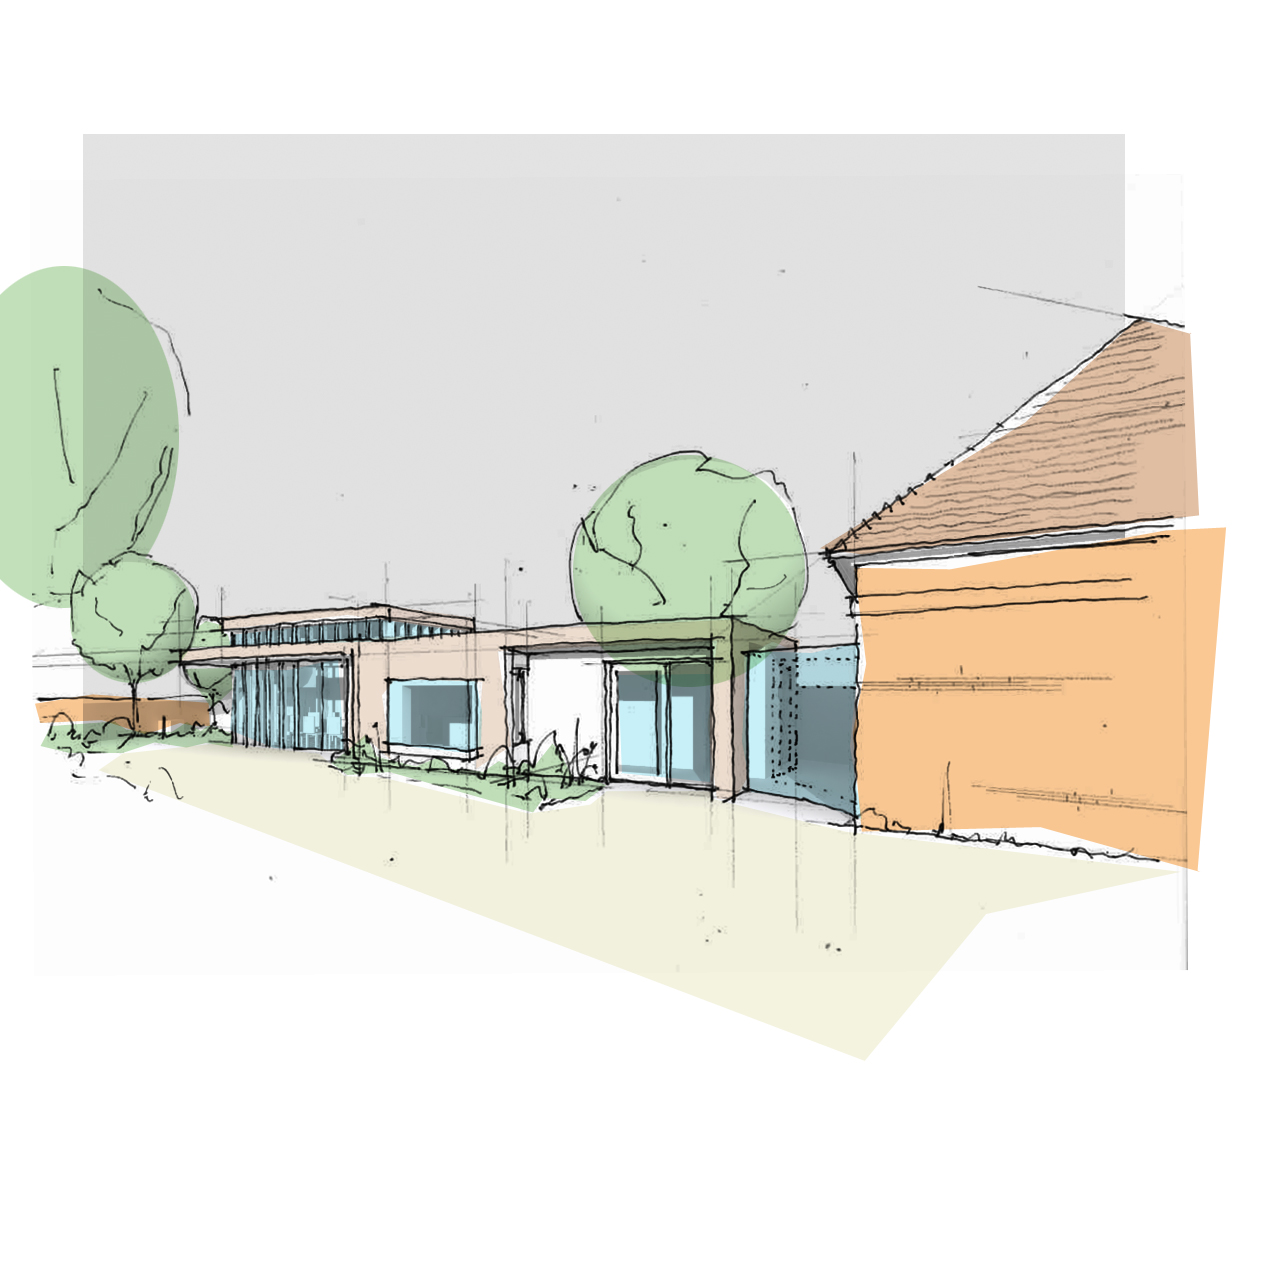 Architect's sketch of the new development